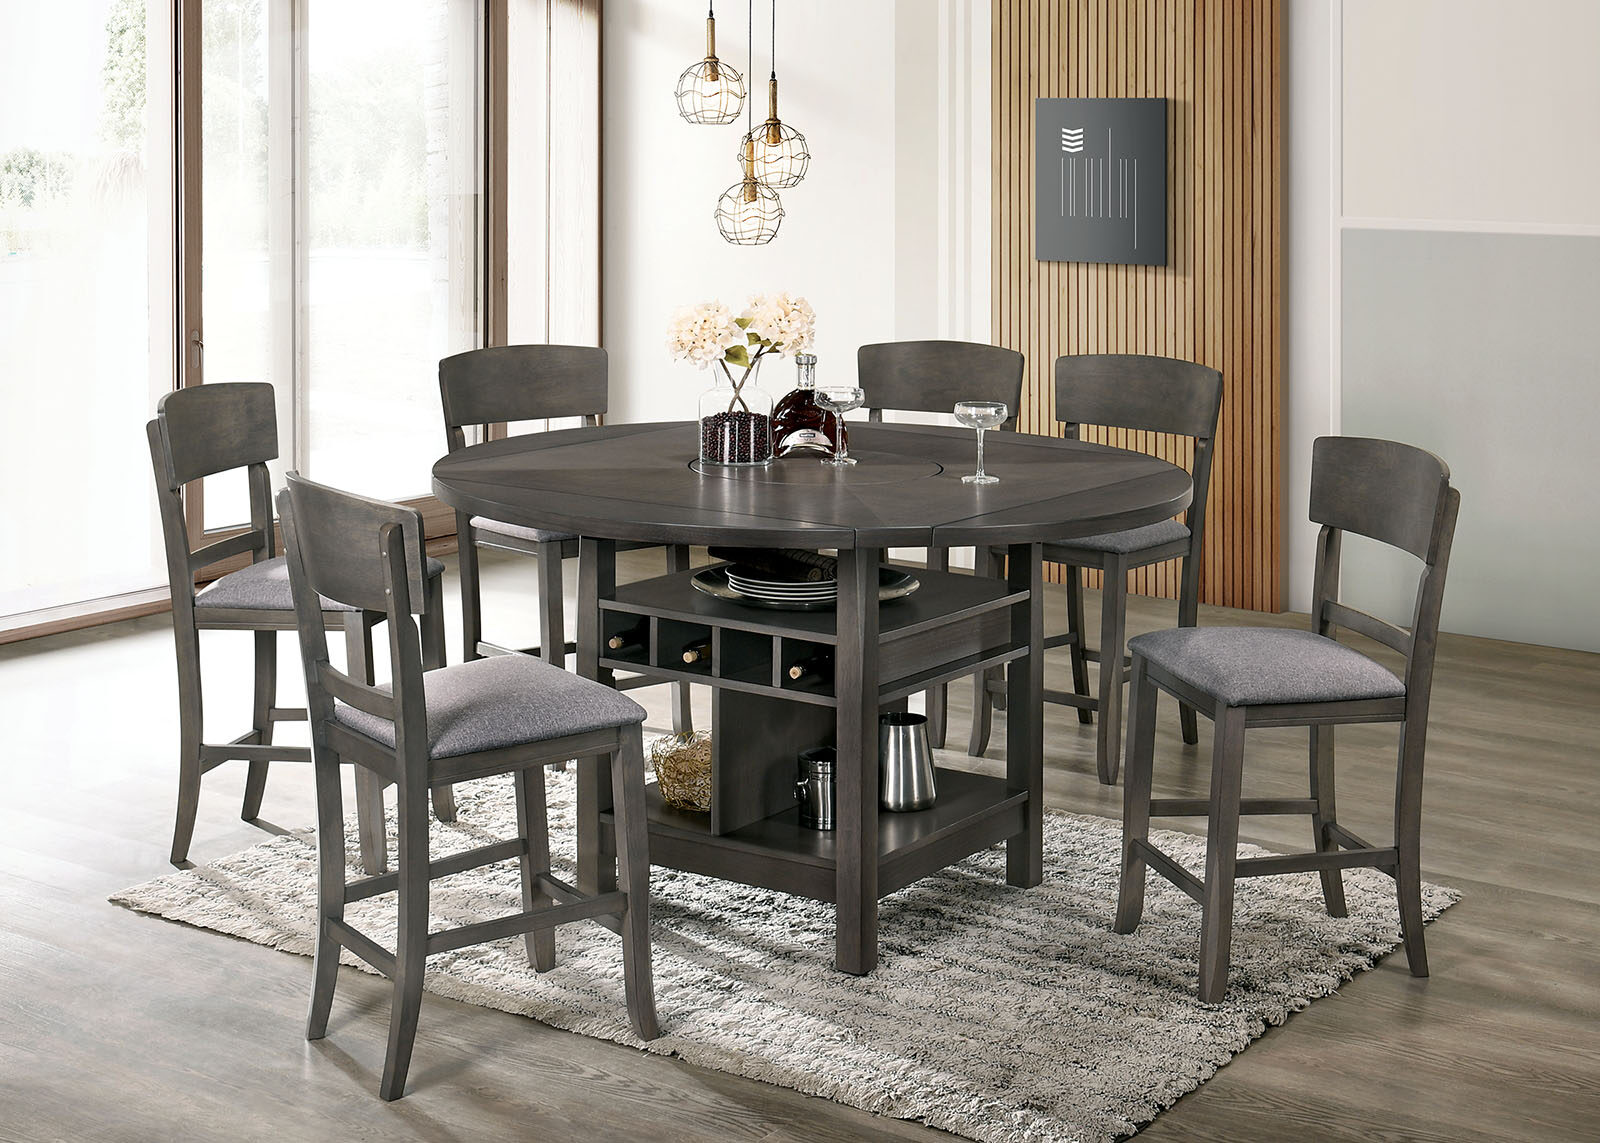 Counter Height Dining Sets, Round Dining Table For 6 Counter Height